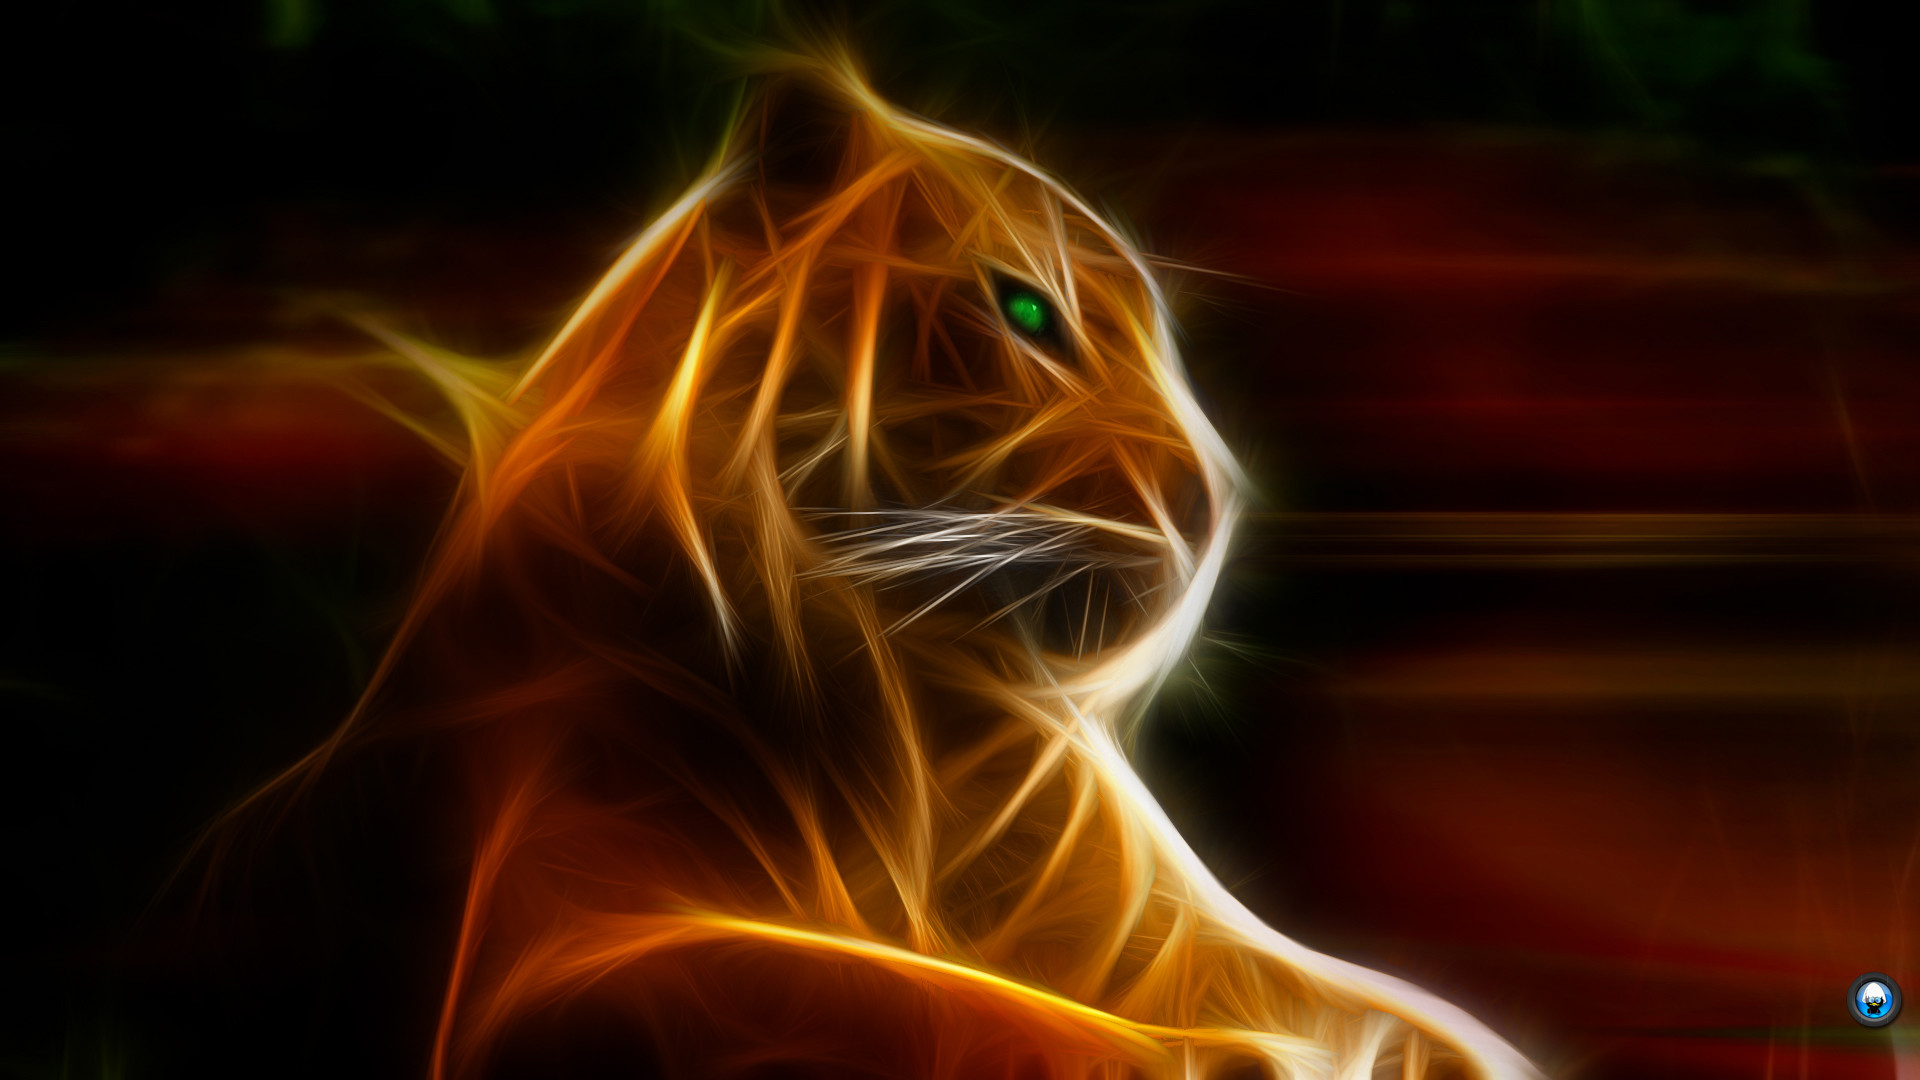 1920x1080 Cool 3D Backgrounds of Tigers | Cool 3D Backgrounds of Tigers - Bing images